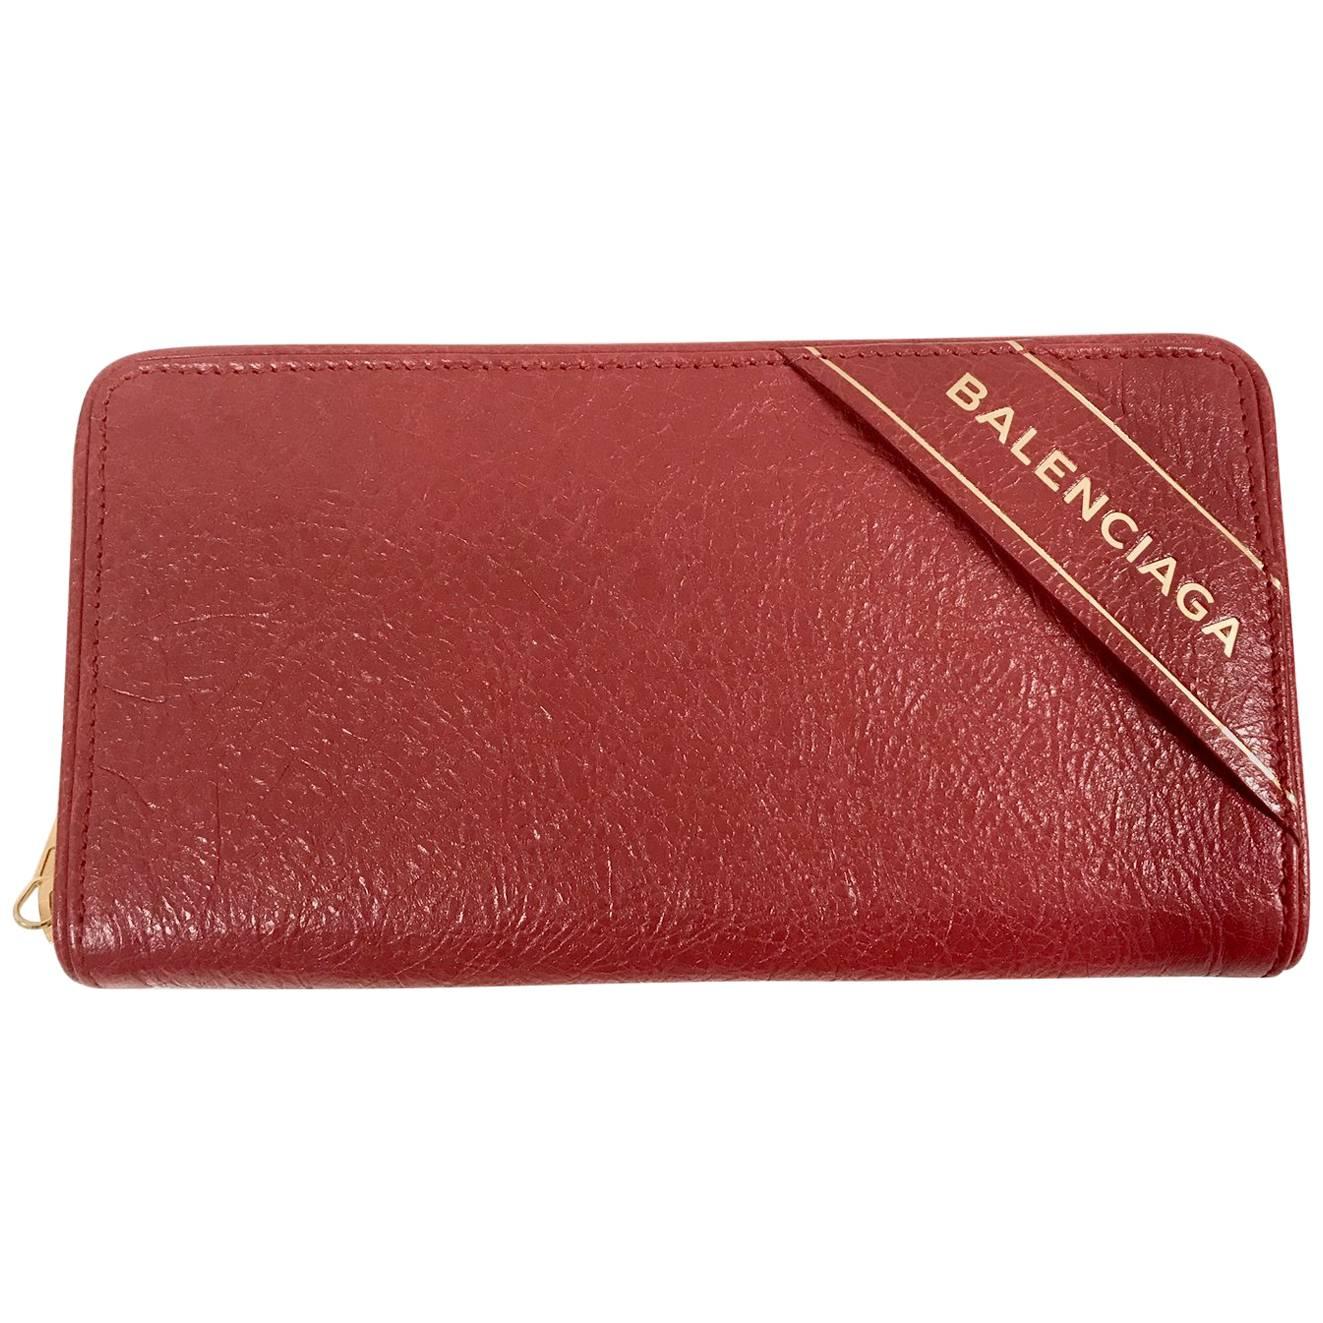 Balenciaga Wallet in Red Leather 2017 For Sale